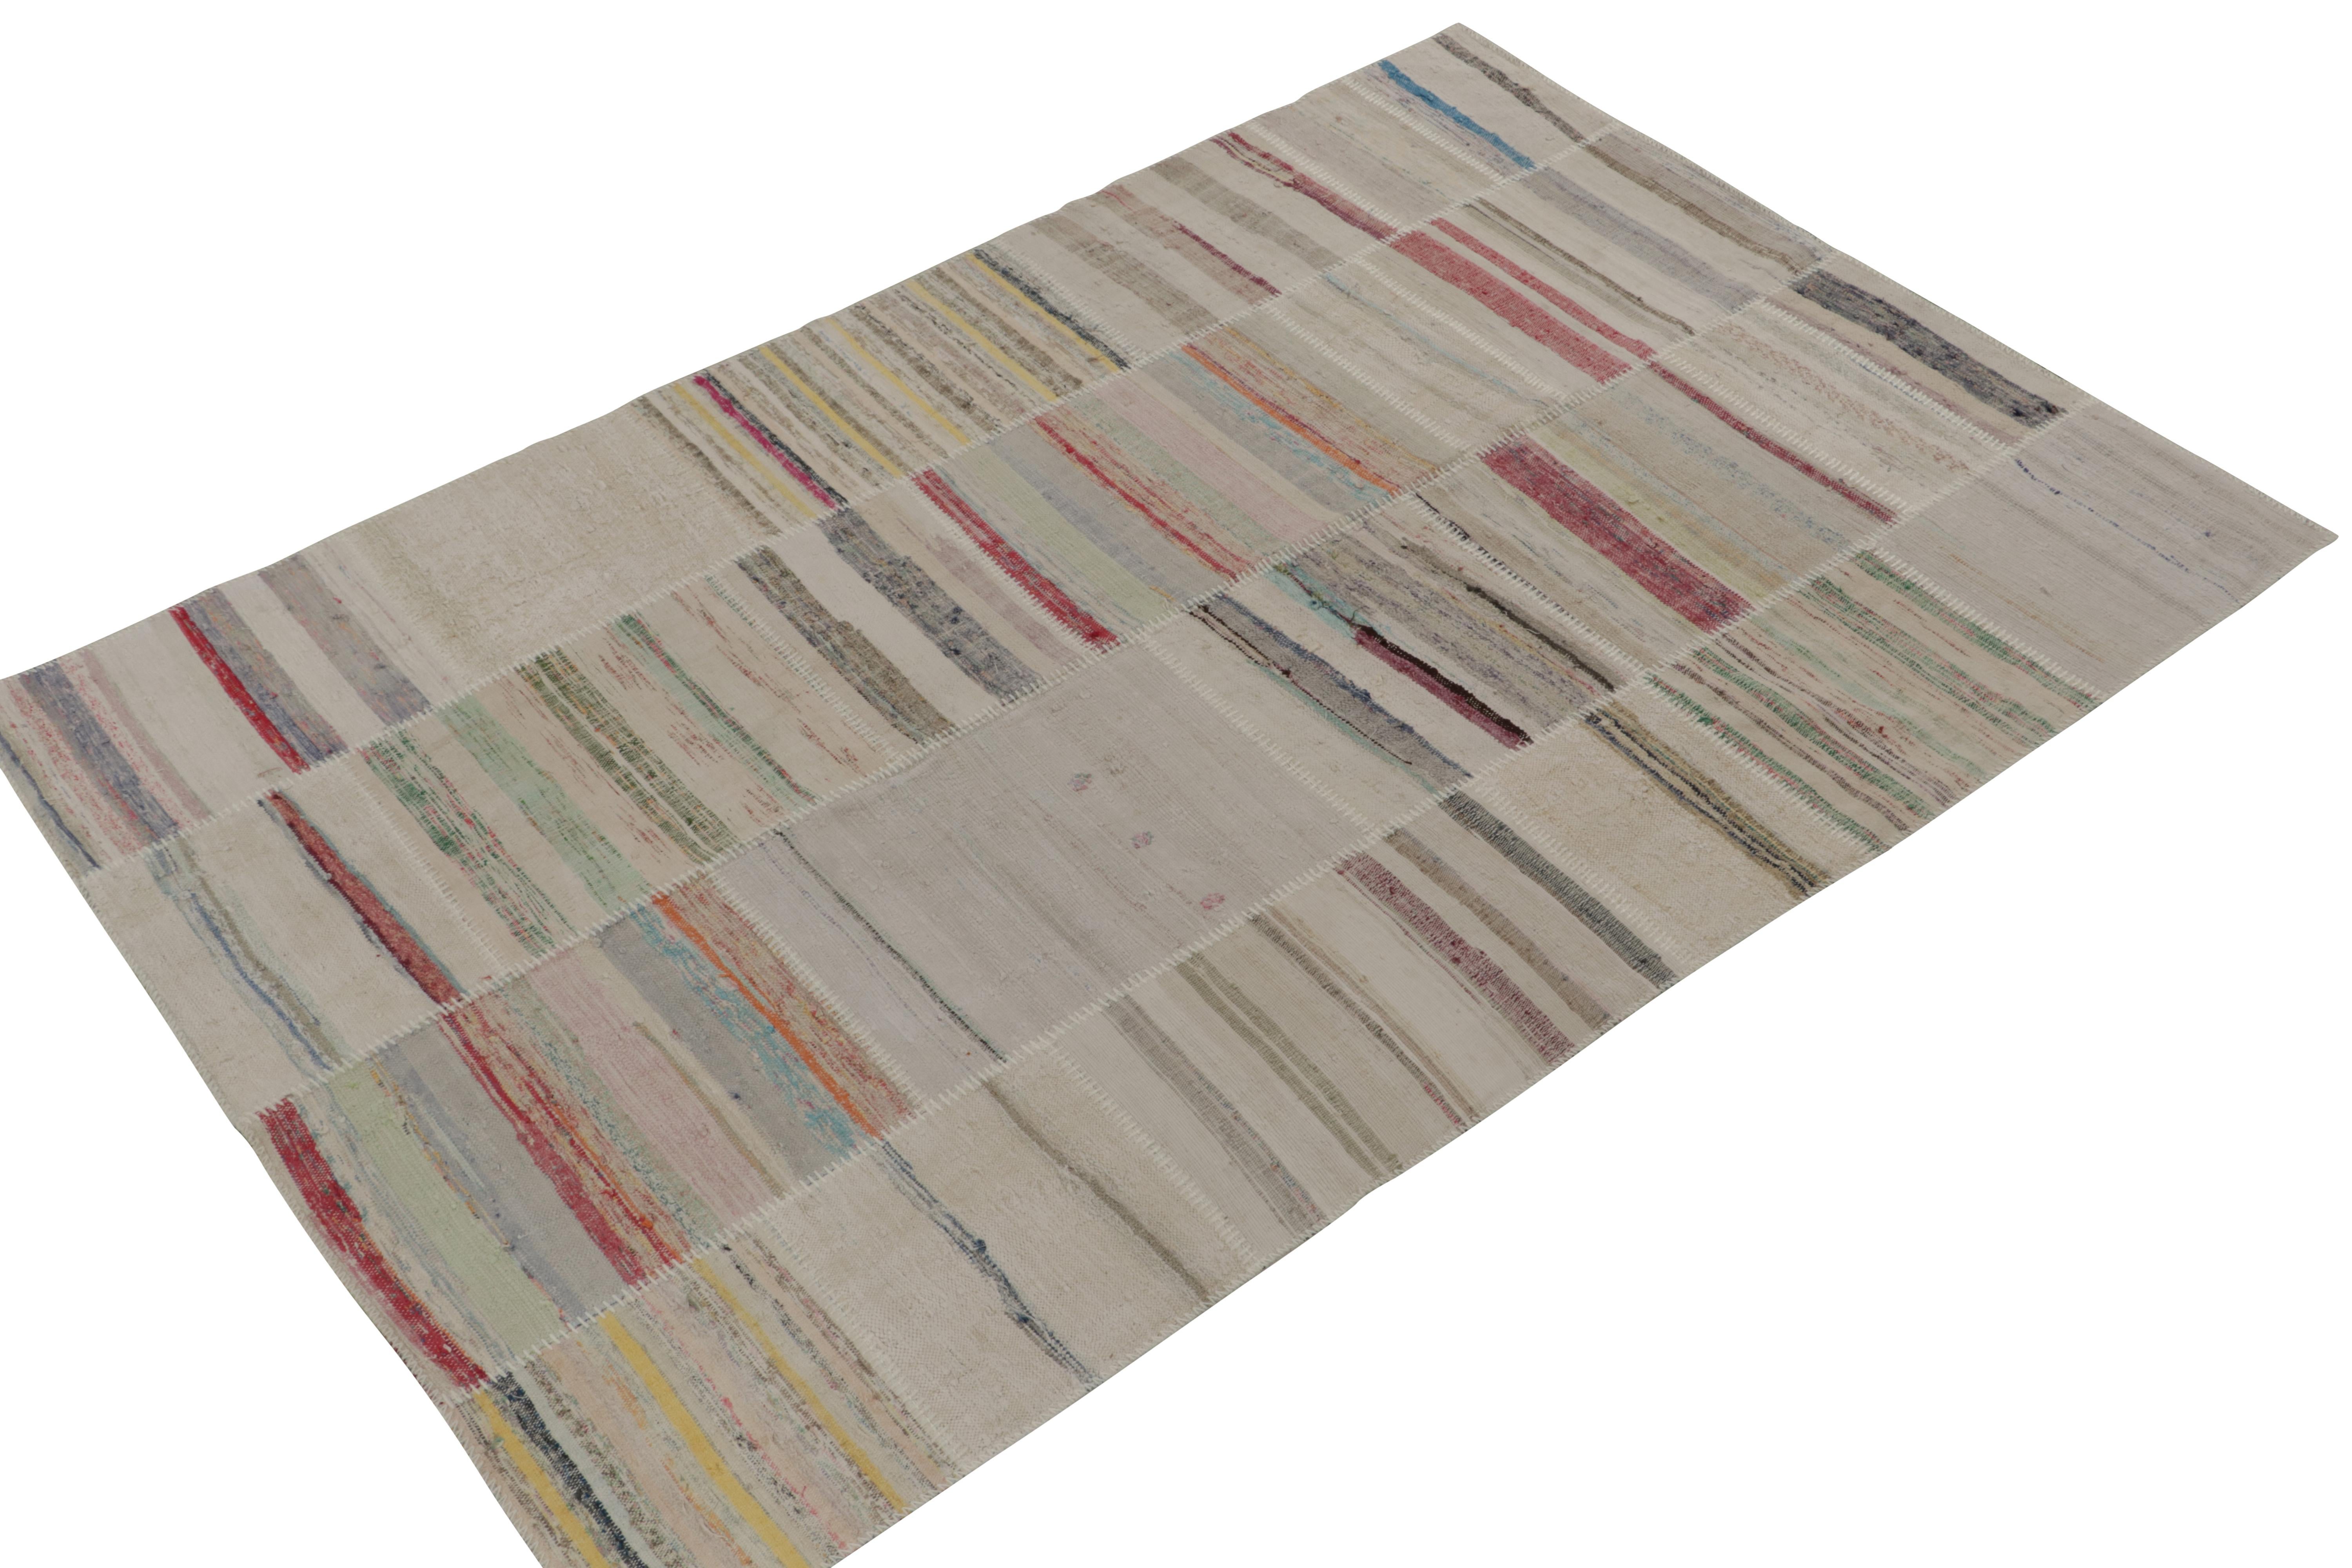 Handwoven in wool, Rug & Kilim presents a 6x9 contemporary rug from their innovative new patchwork kilim collection. 

On the Design: 

This flat weave technique repurposes vintage yarns in polychromatic stripes and striae, achieving a playful